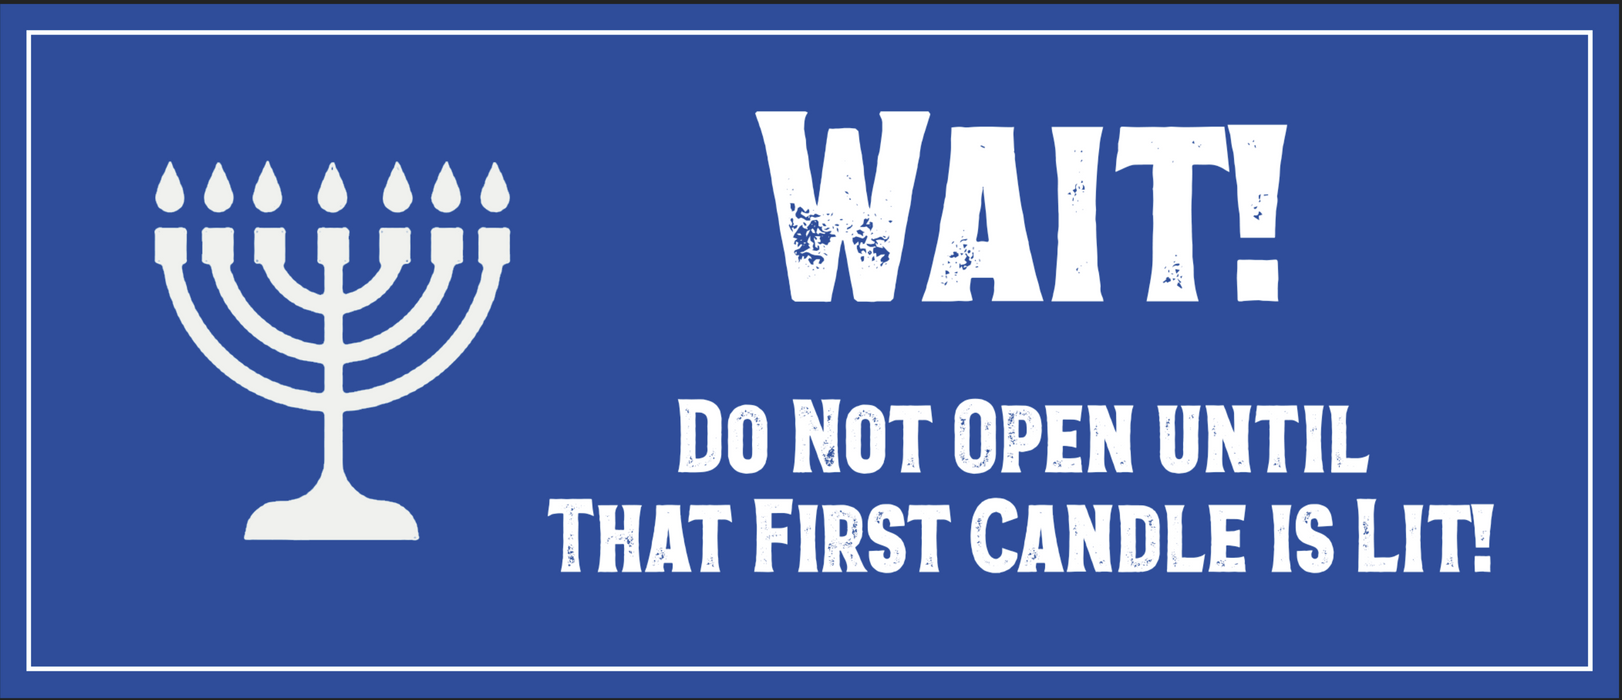 "Do Not Open Until That First Candle is Lit" Sticker Conquest Maps LLC